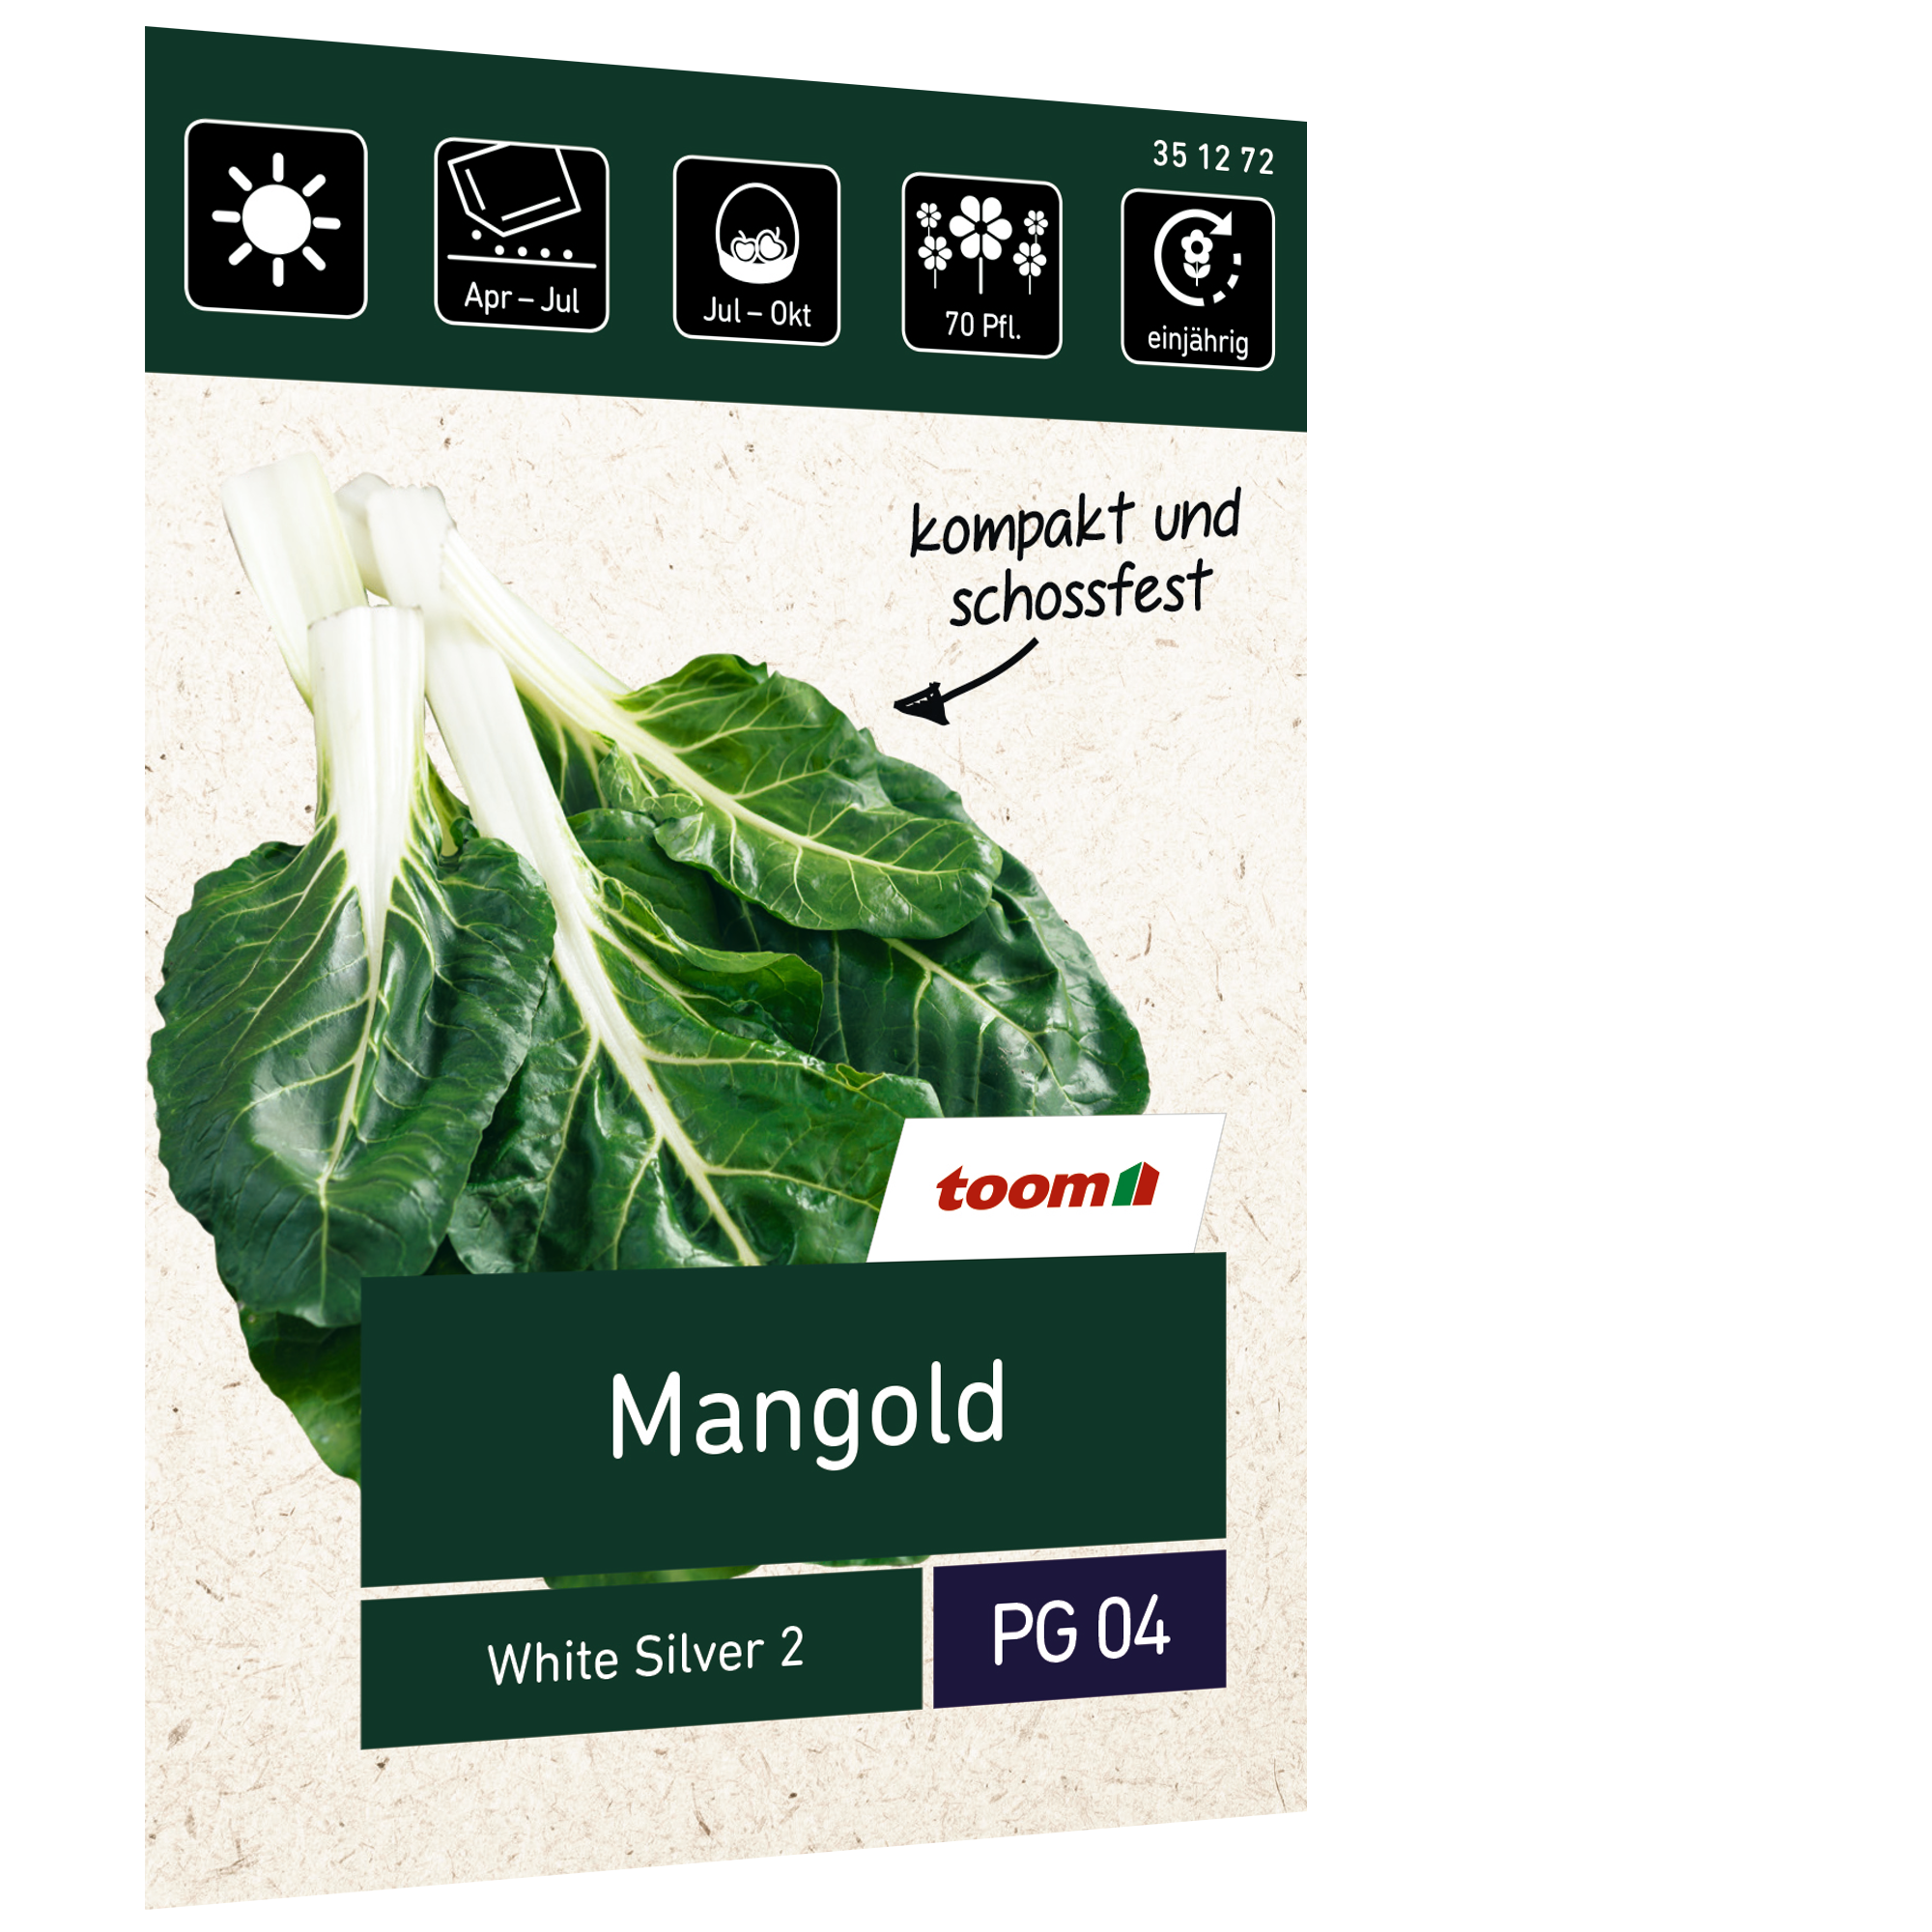 Mangold 'White Silver 2' + product picture